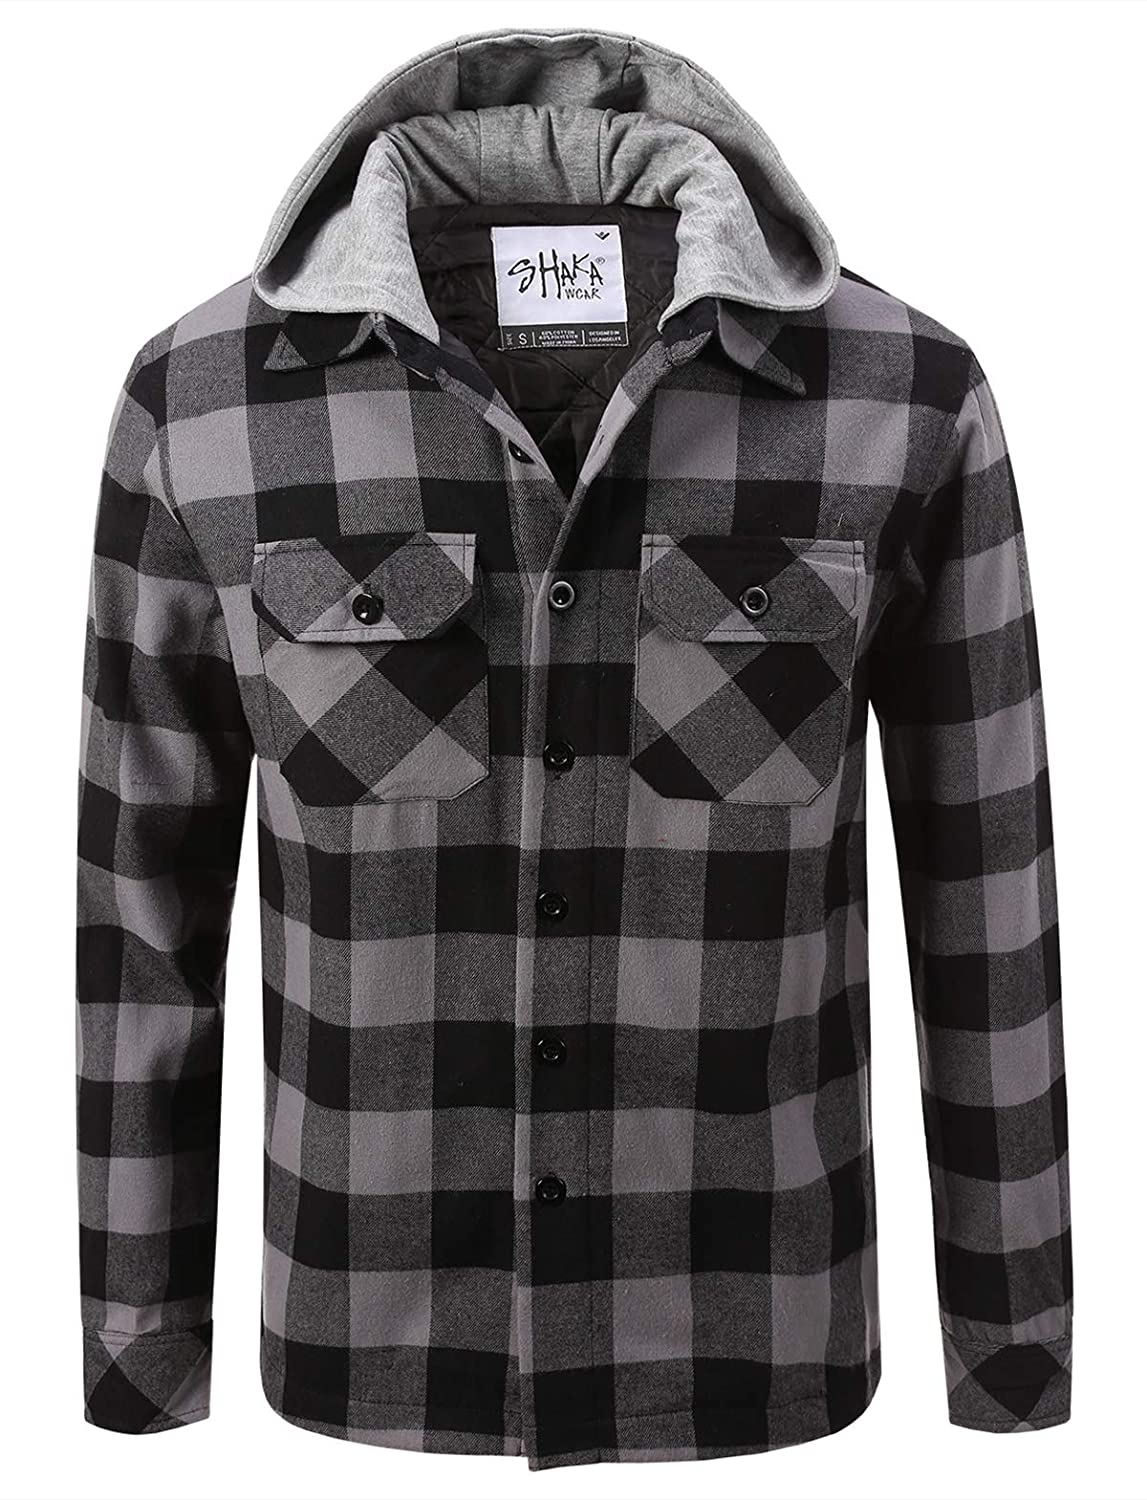 Shaka Wear Men's Plaid Shirts – Flannel Hooded Long Sleeve Casual Button Up  Fleece Soft Quilted Lined Hoodie Jacket PFJ02 Black S at  Men's  Clothing store